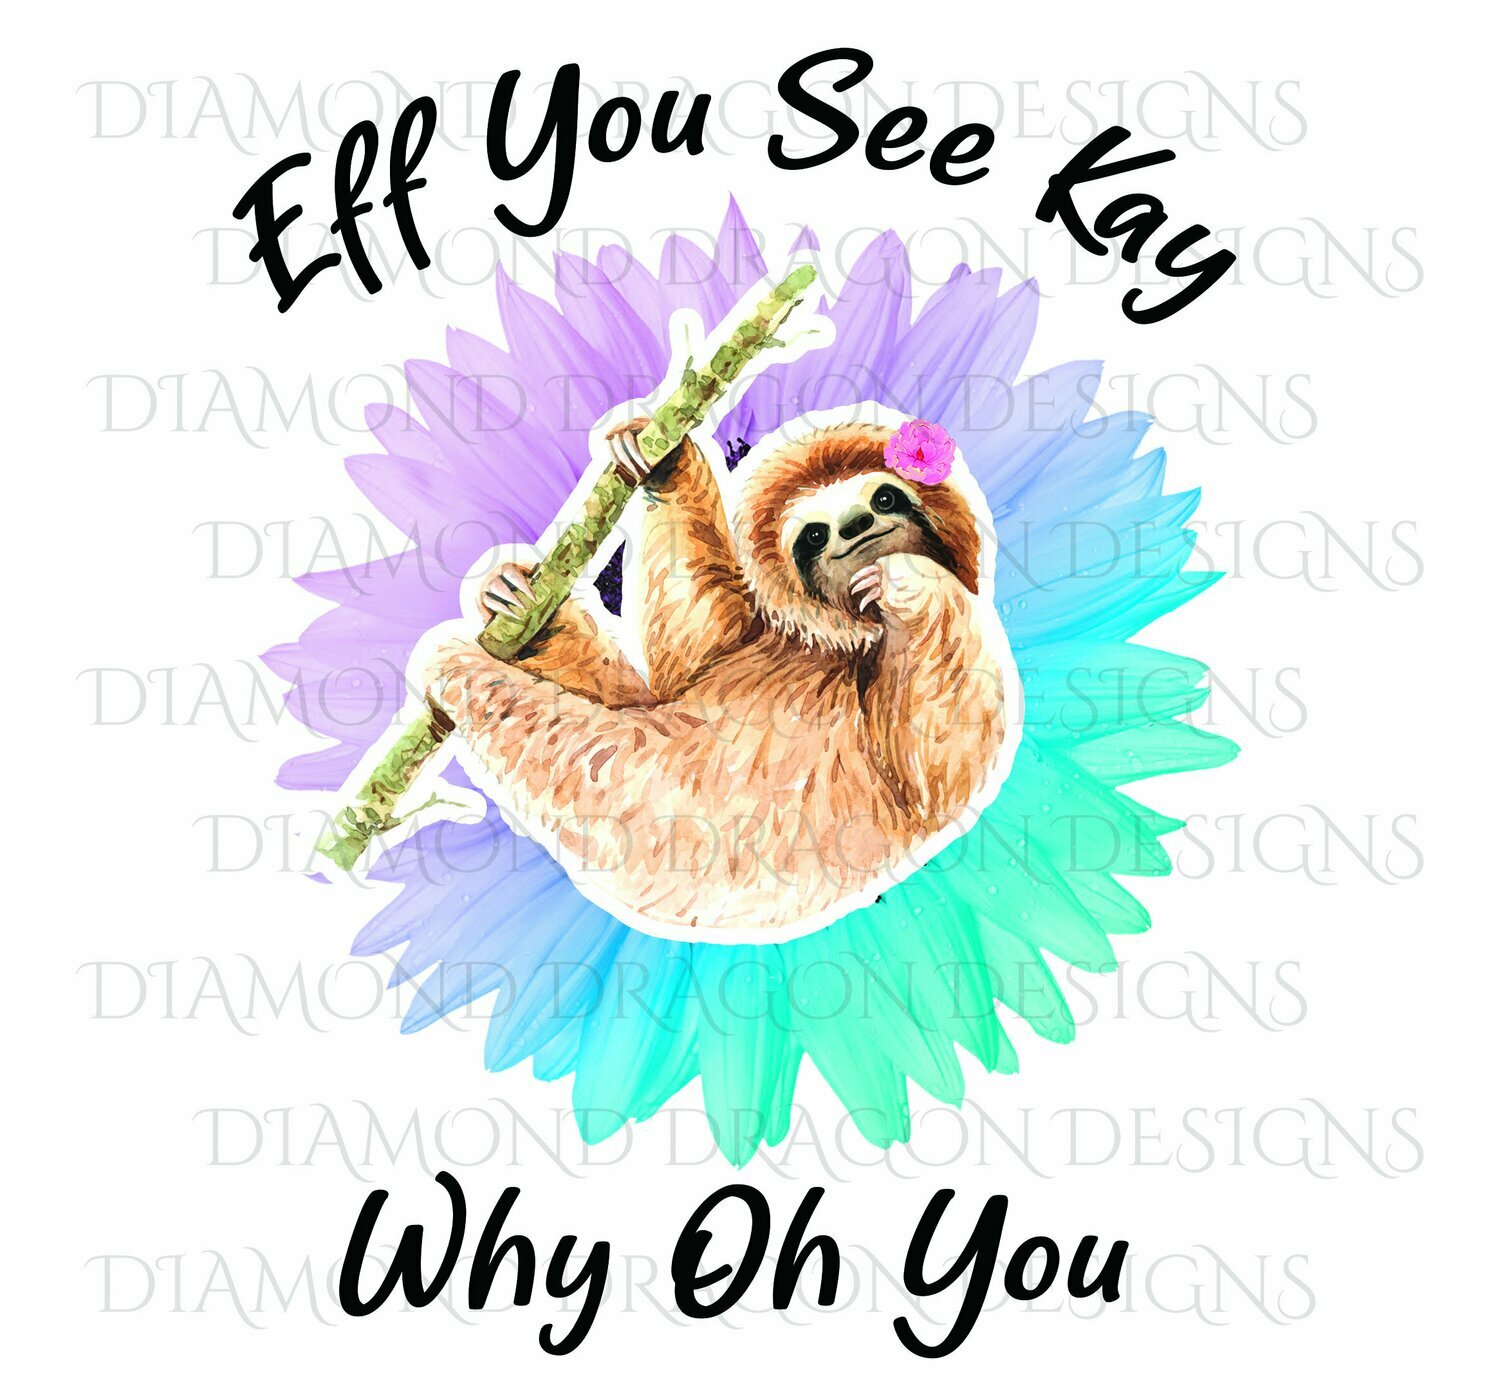 Sloths - Cute Sloth, Sloth with Flower, Eff You See Kay, Why Oh You, Sunflower Sloth, Digital Image